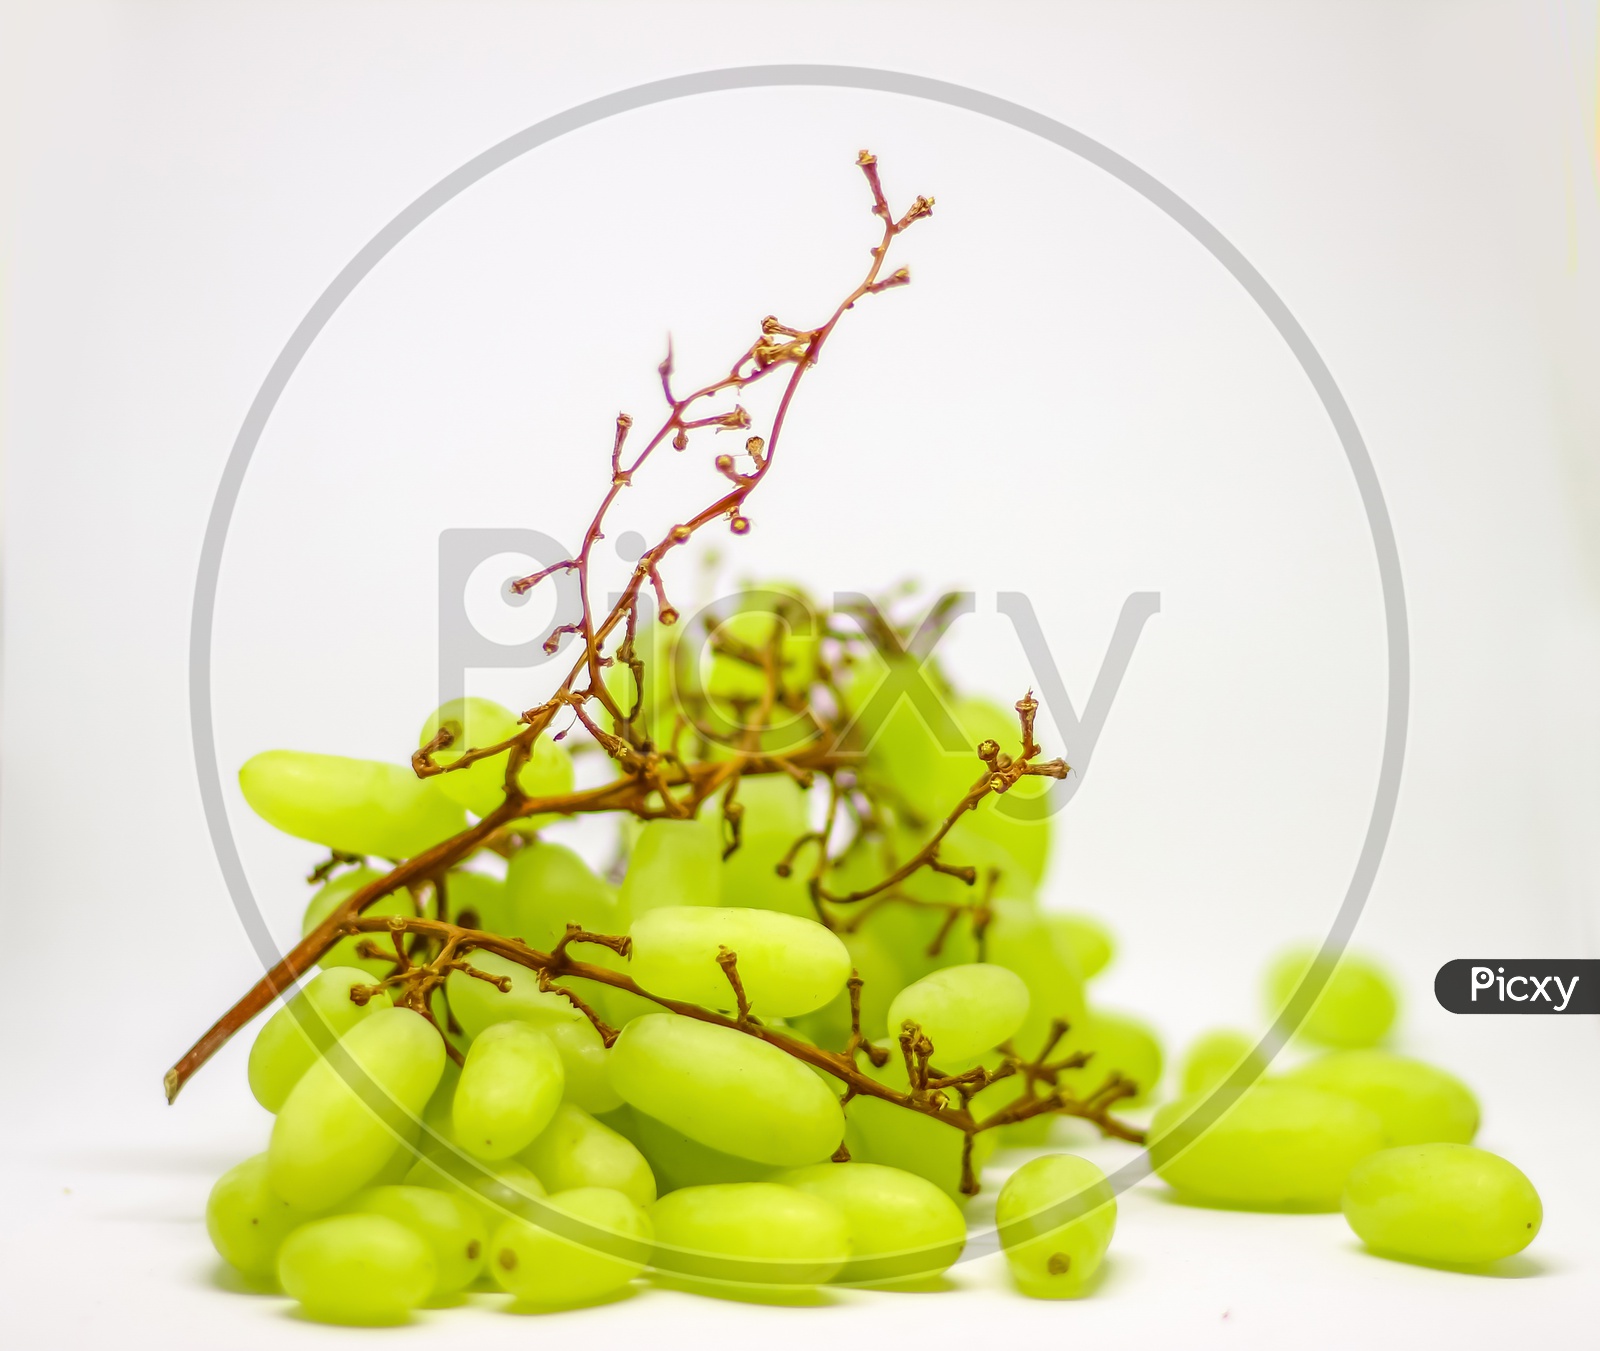 Green Grape With Branches Isolated On White. With Clipping Path. Full Depth Of Field.